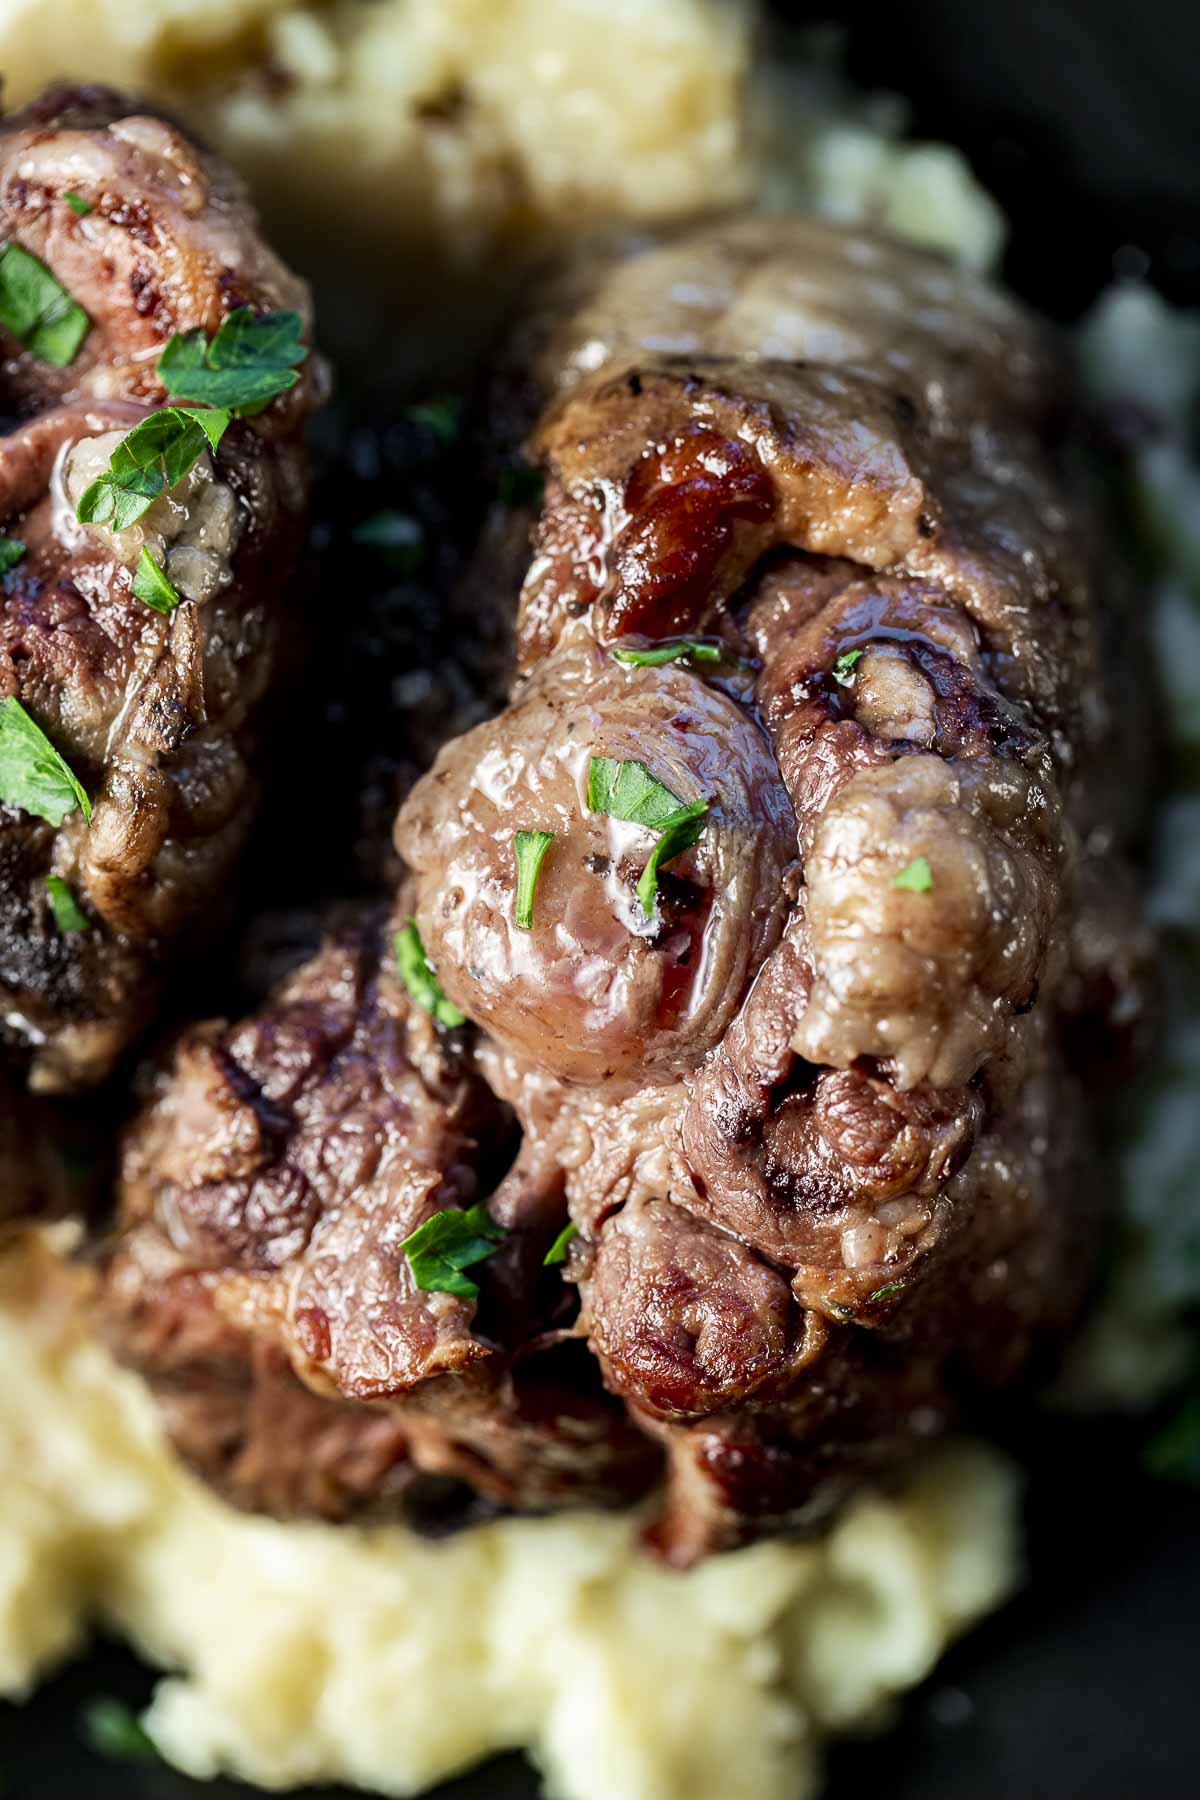 Close up view of a cooked oxtail.